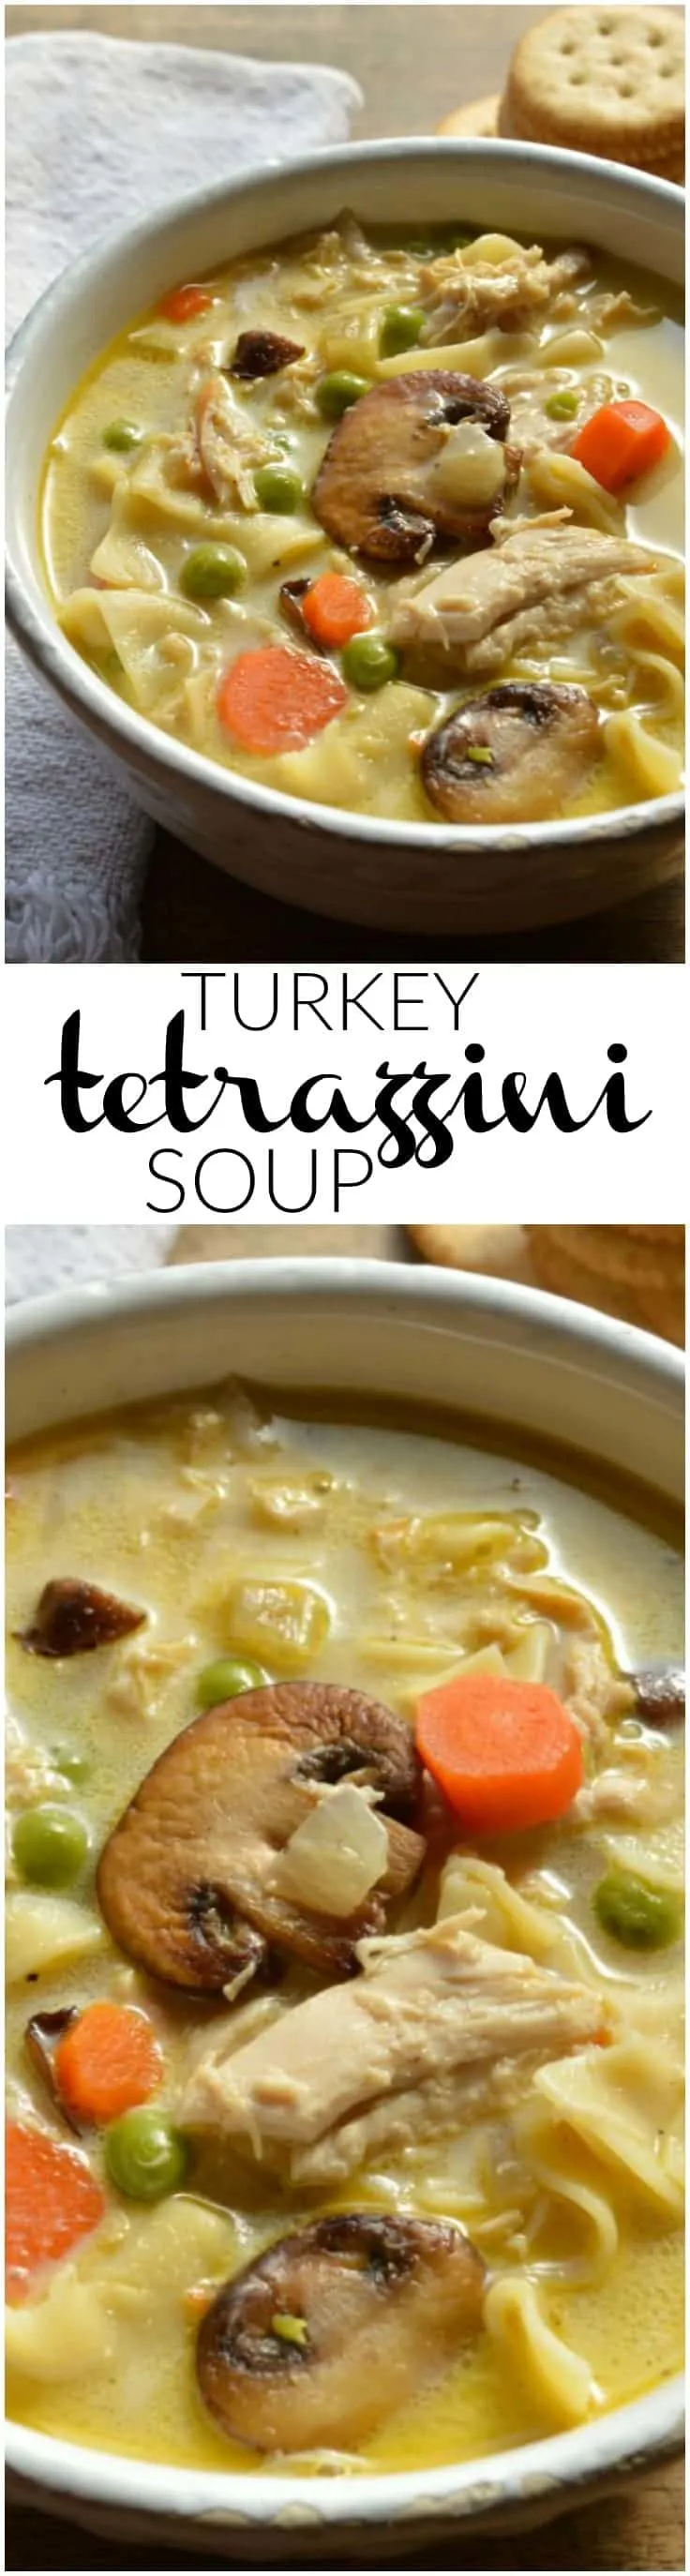 The perfect way to use up Thanksgiving leftovers! You can also make this Turkey Tetrazzini Soup with leftover chicken or rotisserie chicken